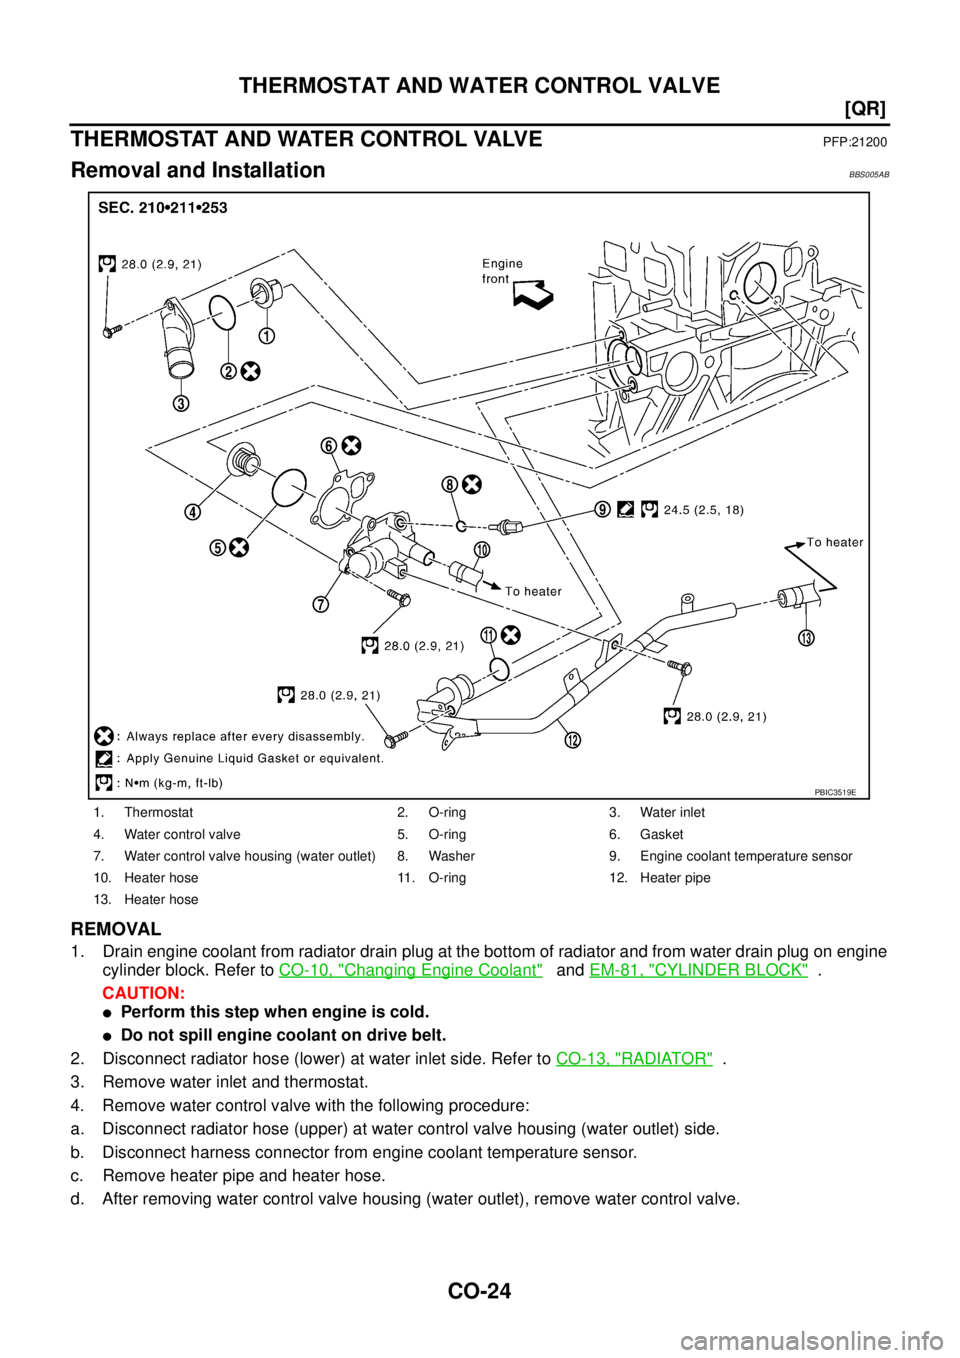 NISSAN TEANA 2003  Service Manual CO-24
[QR]
THERMOSTAT AND WATER CONTROL VALVE
 
THERMOSTAT AND WATER CONTROL VALVEPFP:21200
Removal and InstallationBBS005AB
REMOVAL
1. Drain engine coolant from radiator drain plug at the bottom of r